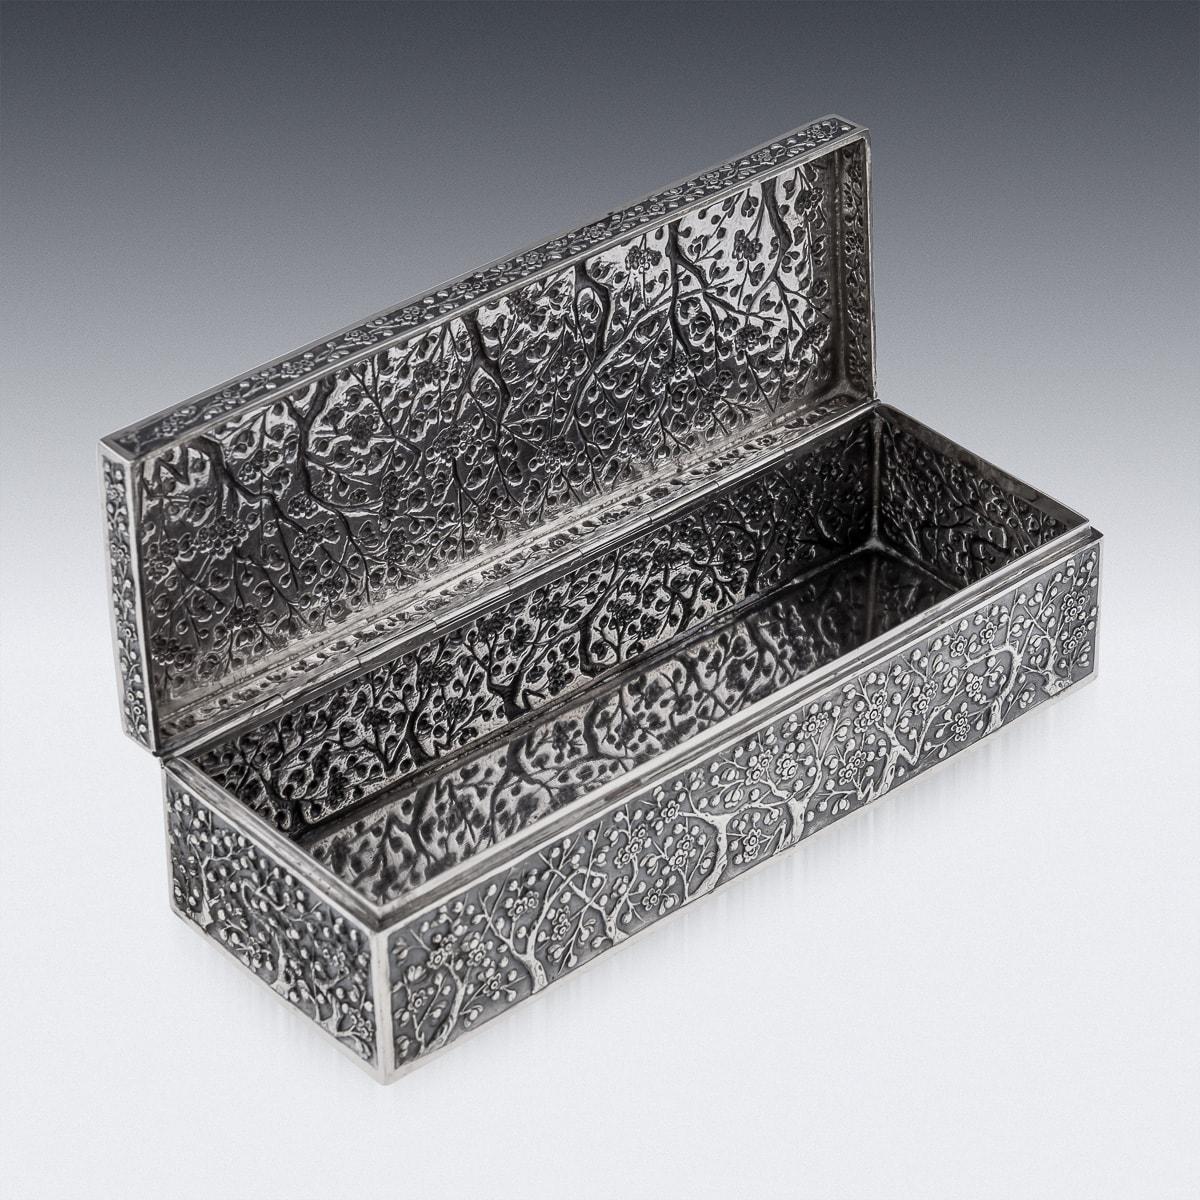 Antique 19th Century Chinese Silver Cherry Blossom Box, Wang Hing 1890 For Sale 3